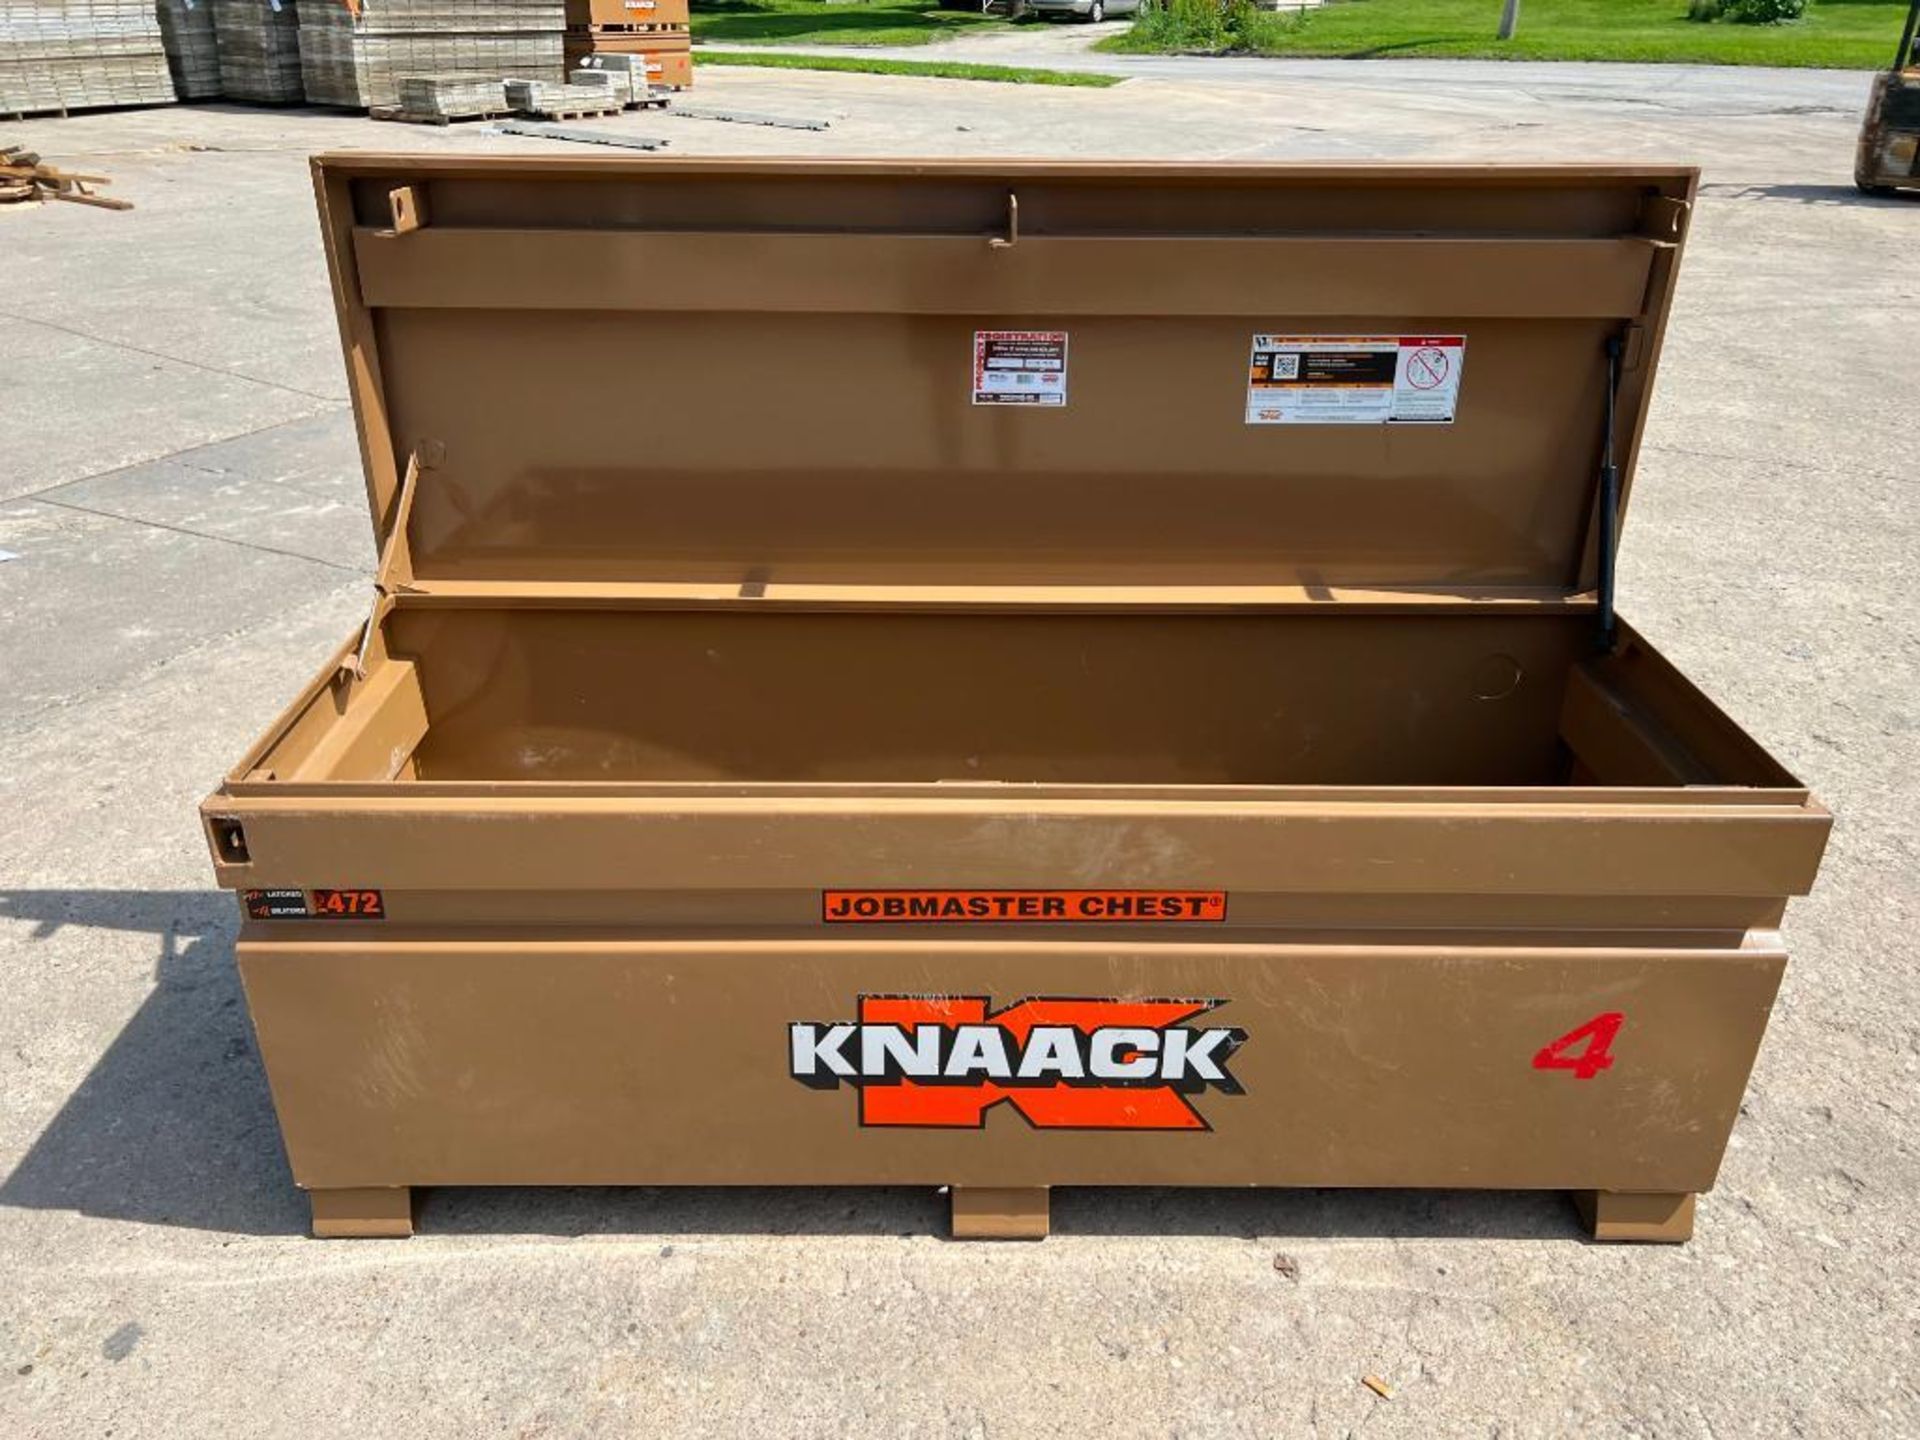 Knaack Jobmaster Chest, Model #2472, Serial #2210917032. Located in Mt. Pleasant, IA - Image 4 of 4